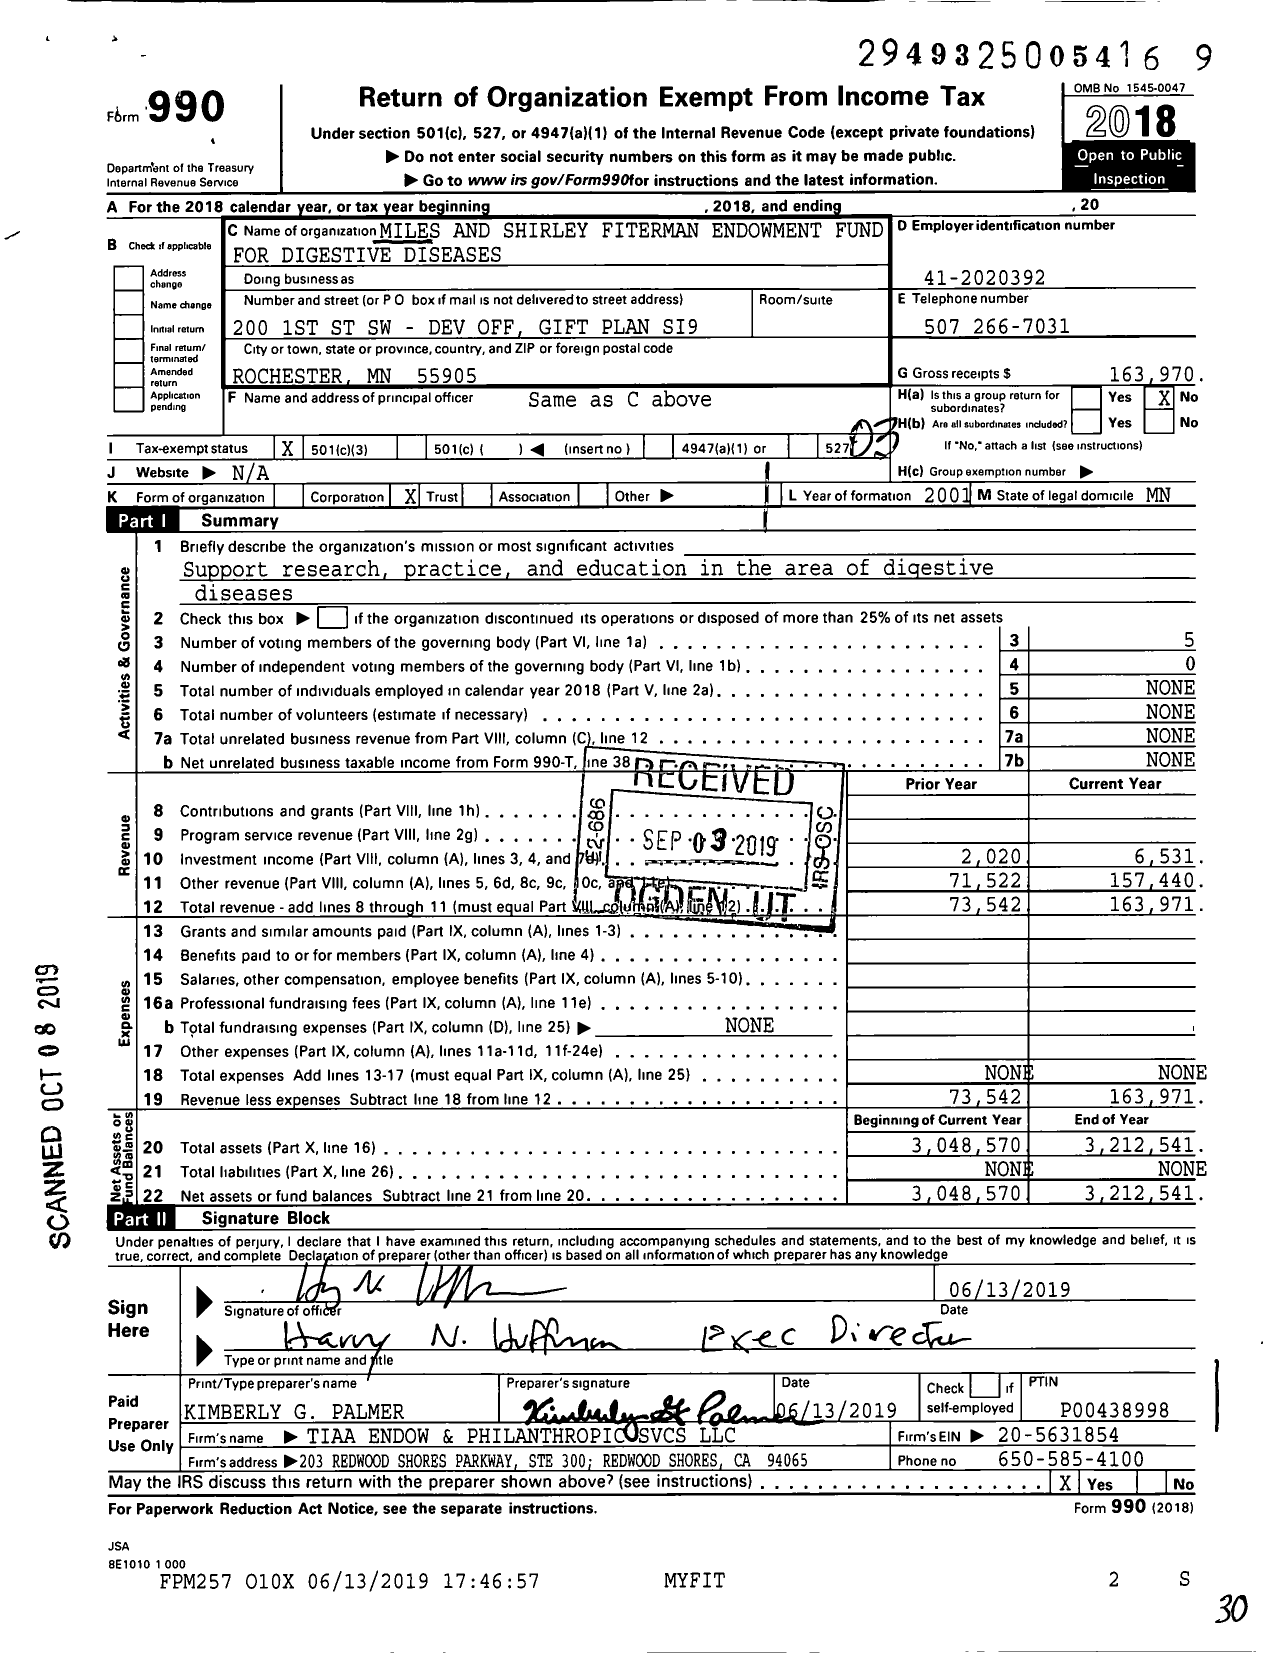 Image of first page of 2018 Form 990 for Miles and Shirley Fiterman Endowment Fund